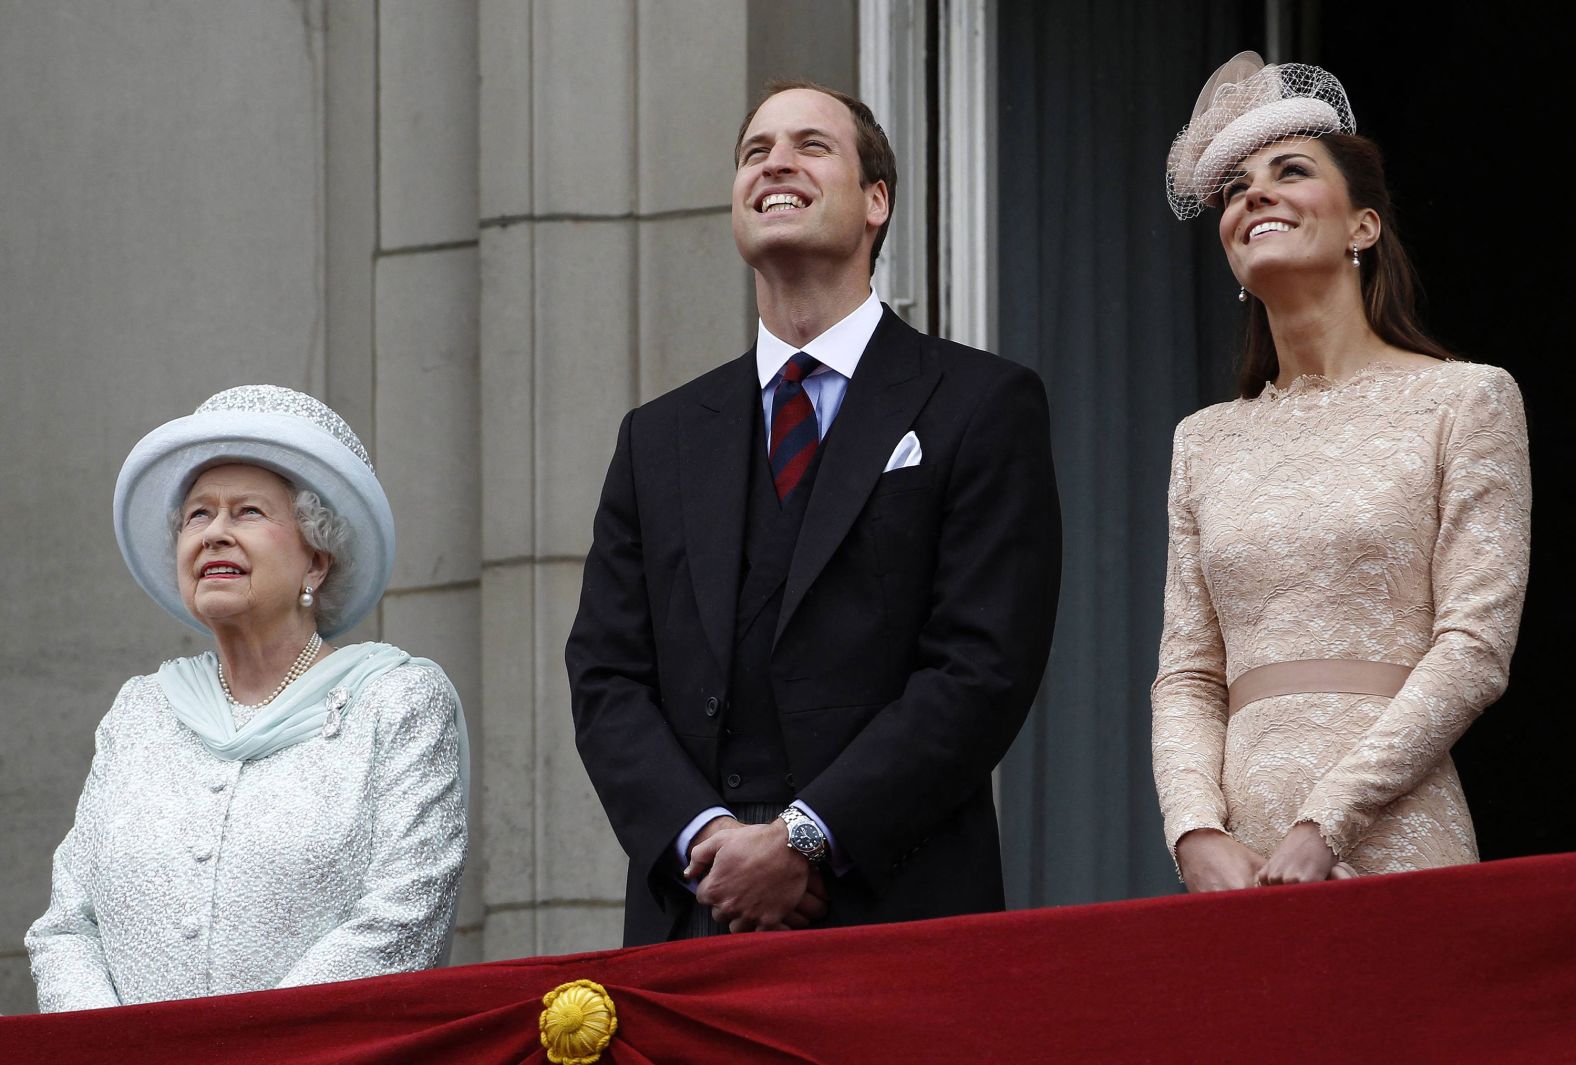 Queen Elizabeth II, William and Kate stand on the balcony of Buckingham Palace during the Queen's Diamond Jubilee celebrations in 2012.